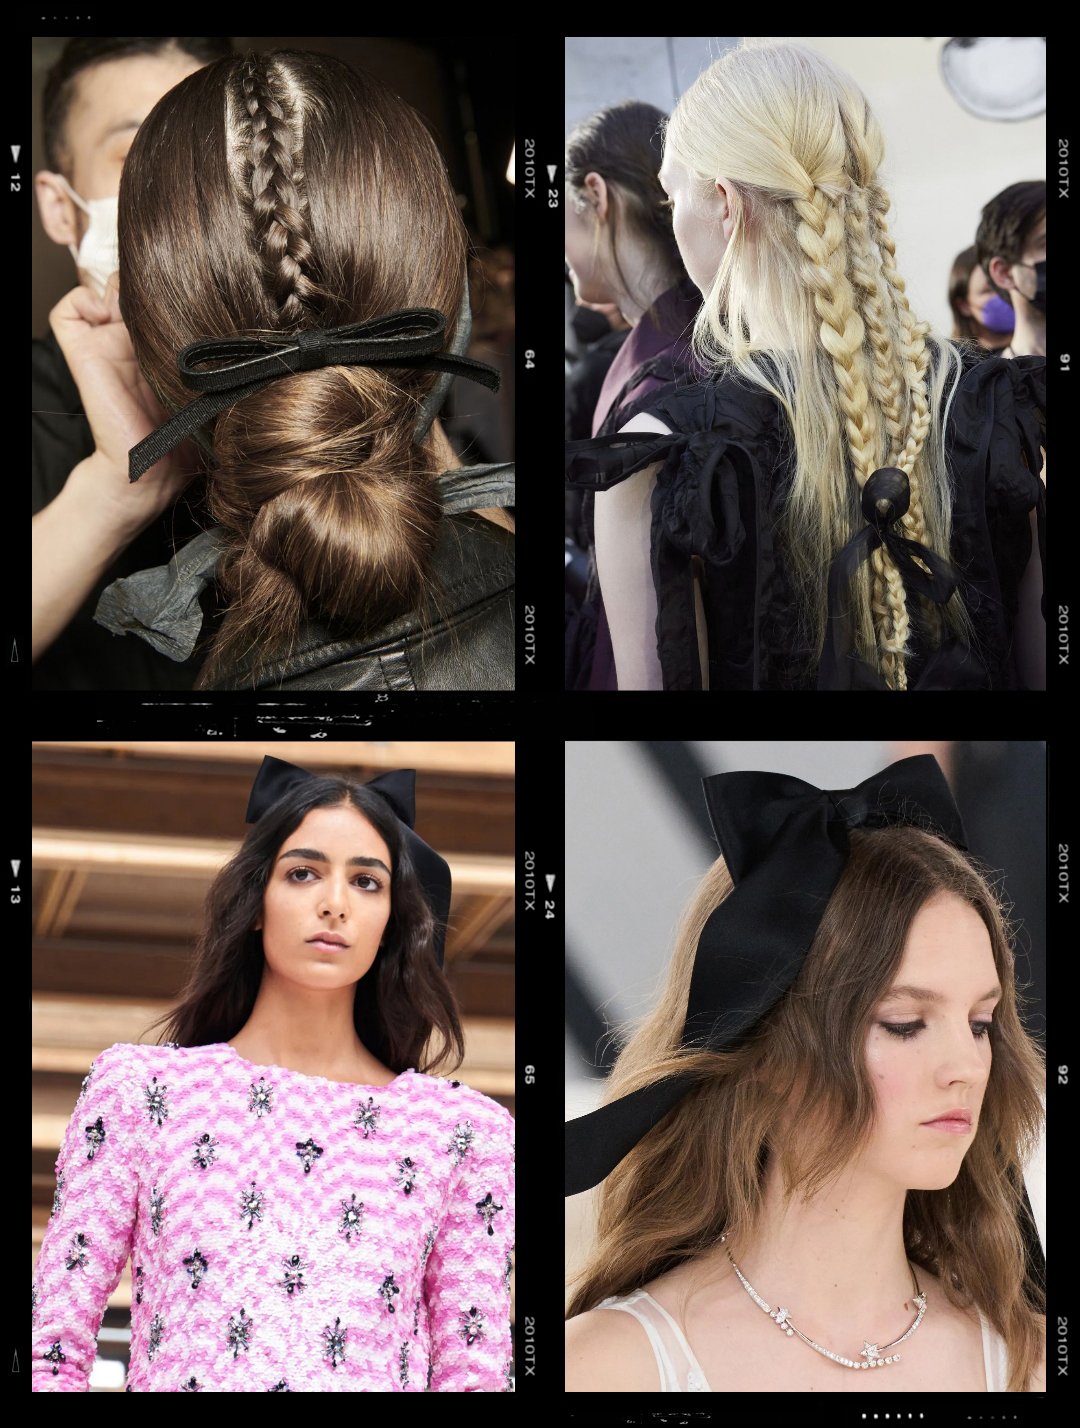 AW/22 CATWALK INSPIRATION: The Bow — BRAID & BOW